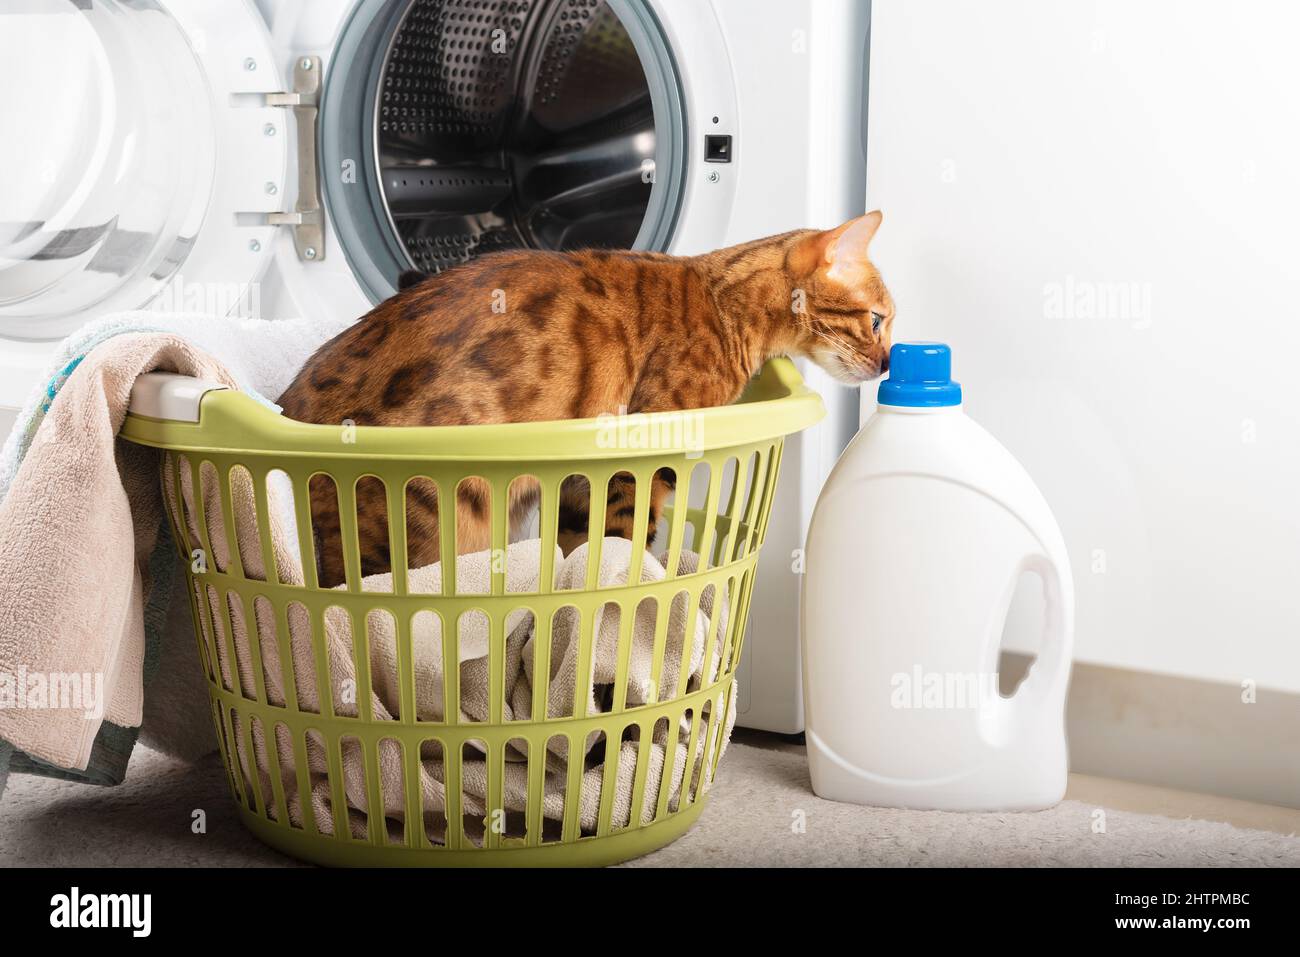 https://c8.alamy.com/comp/2HTPMBC/a-domestic-cat-sniffs-the-laundry-detergent-while-sitting-in-a-laundry-basket-2HTPMBC.jpg